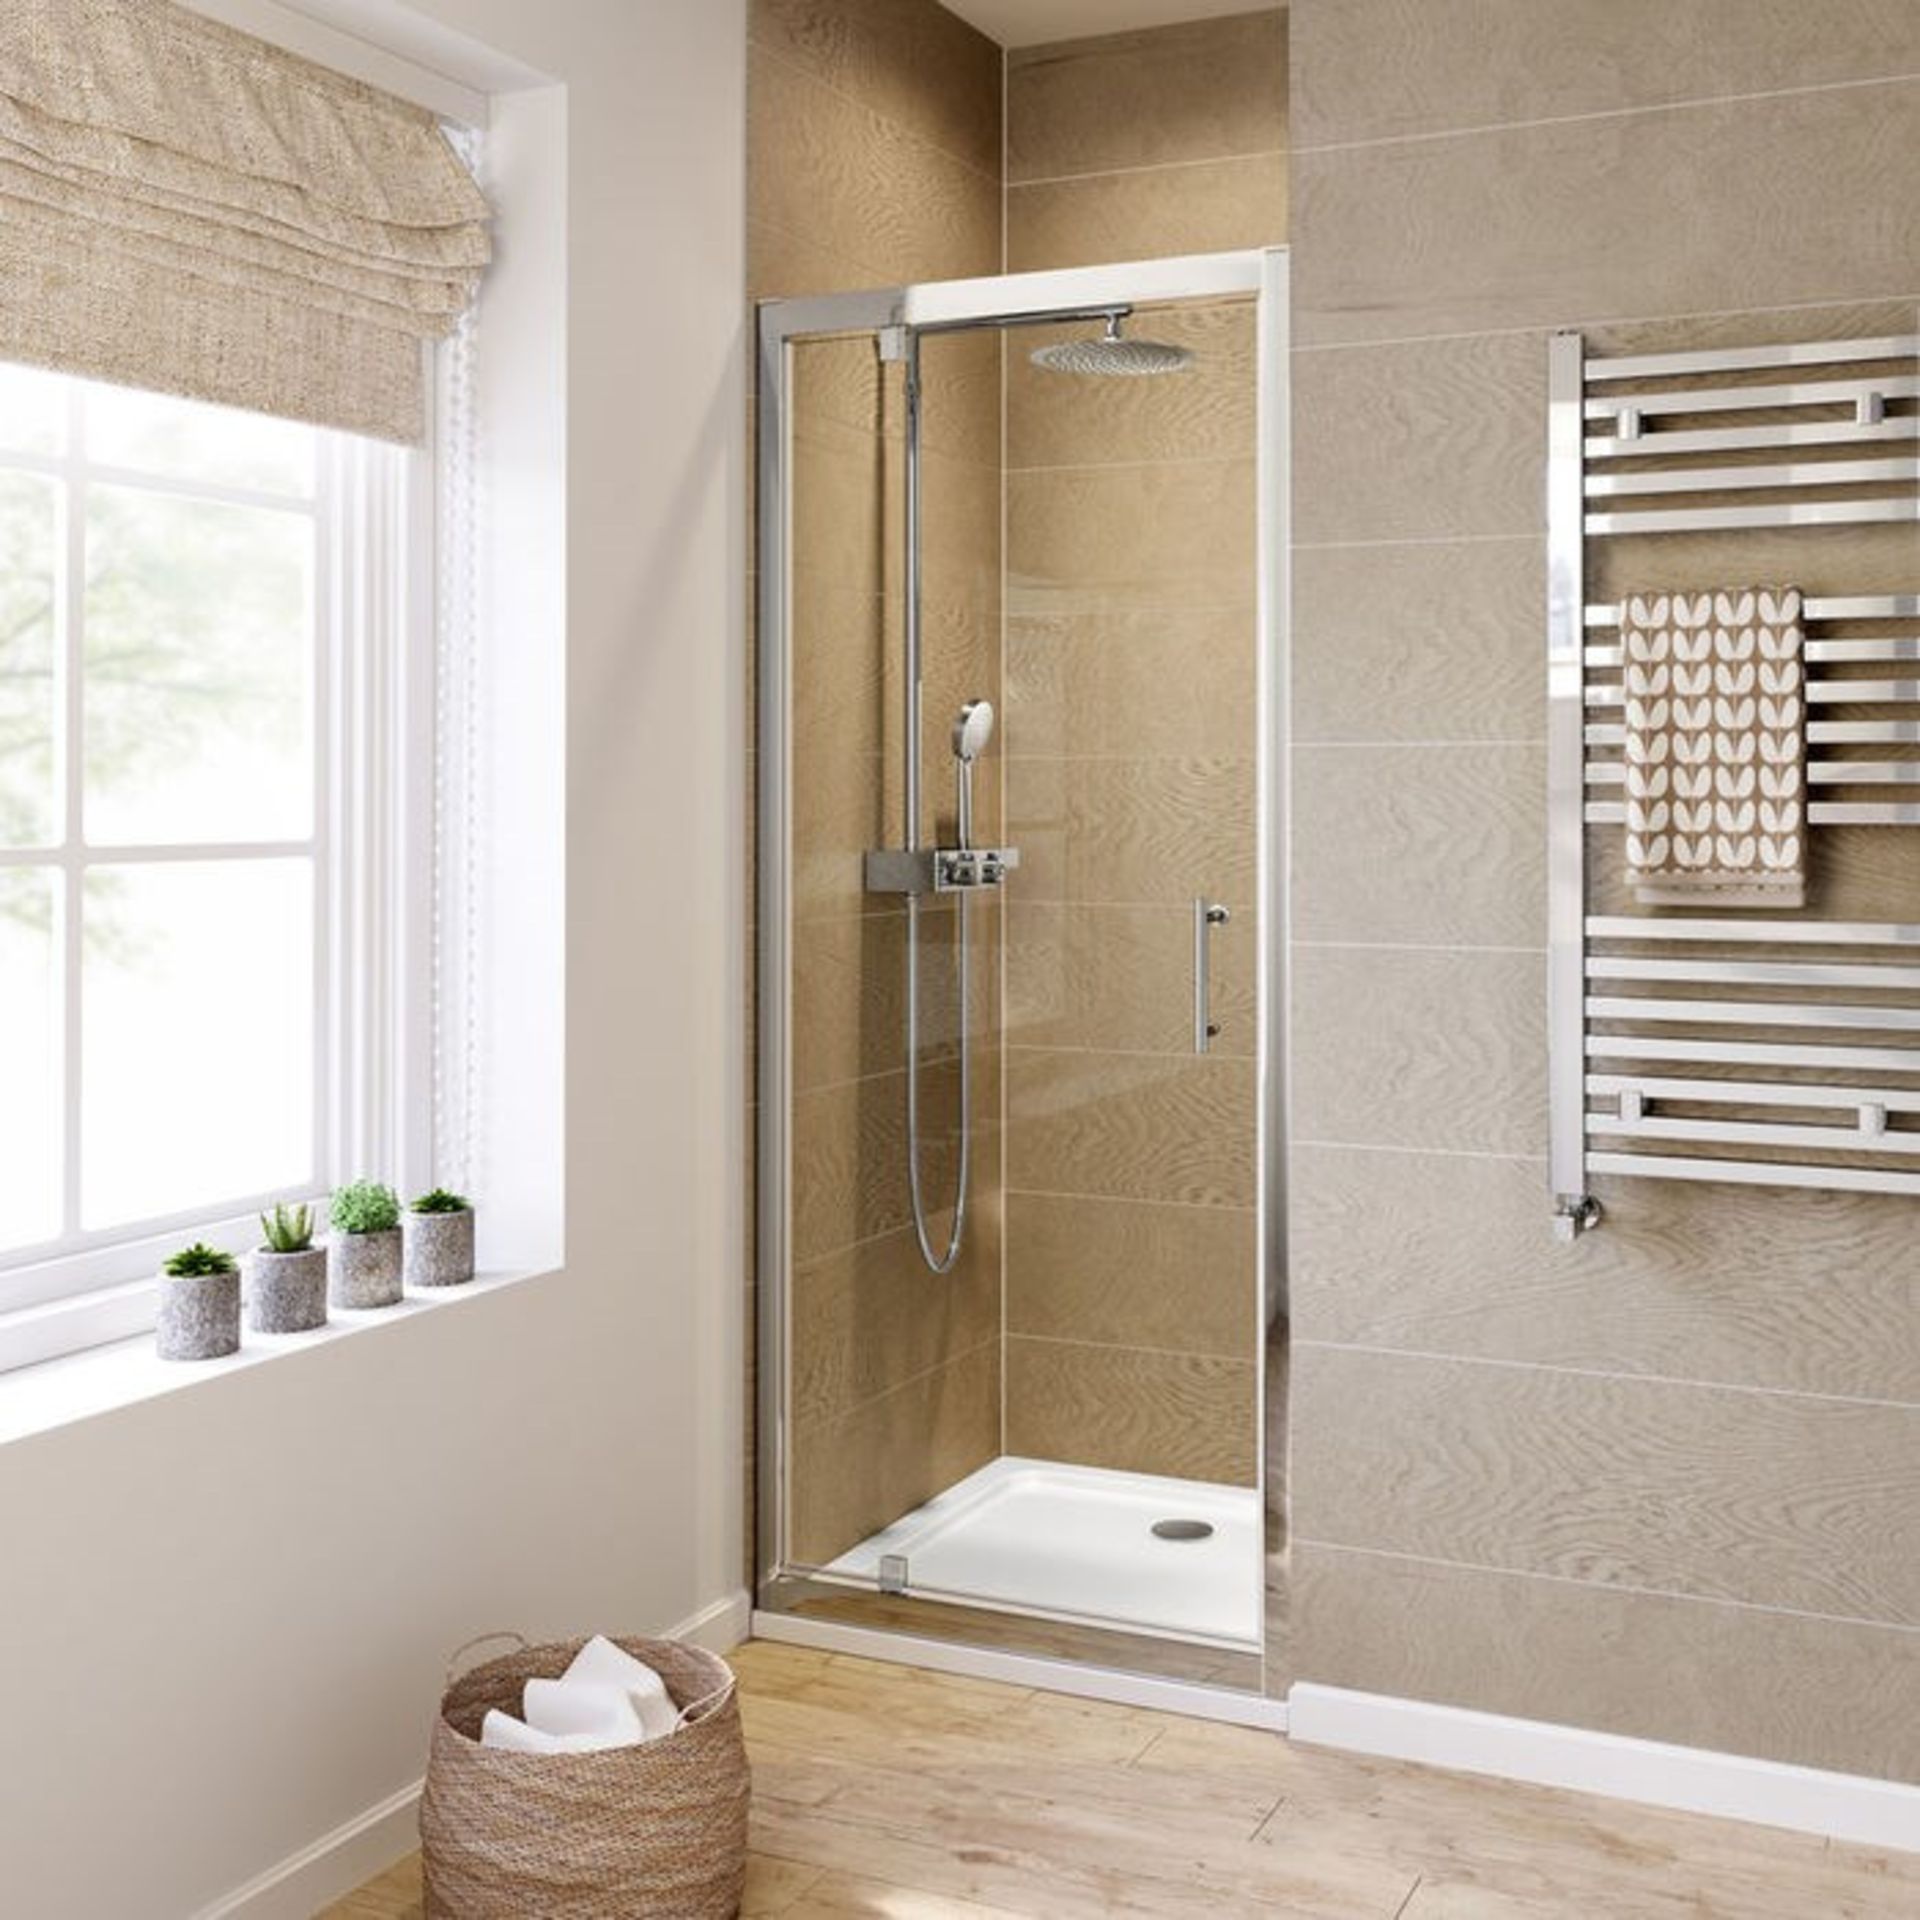 Twyfords 700mm - 6mm - Premium Pivot Shower Door. RRP £299.99.8mm Safety Glass Fully waterpro... - Image 3 of 3